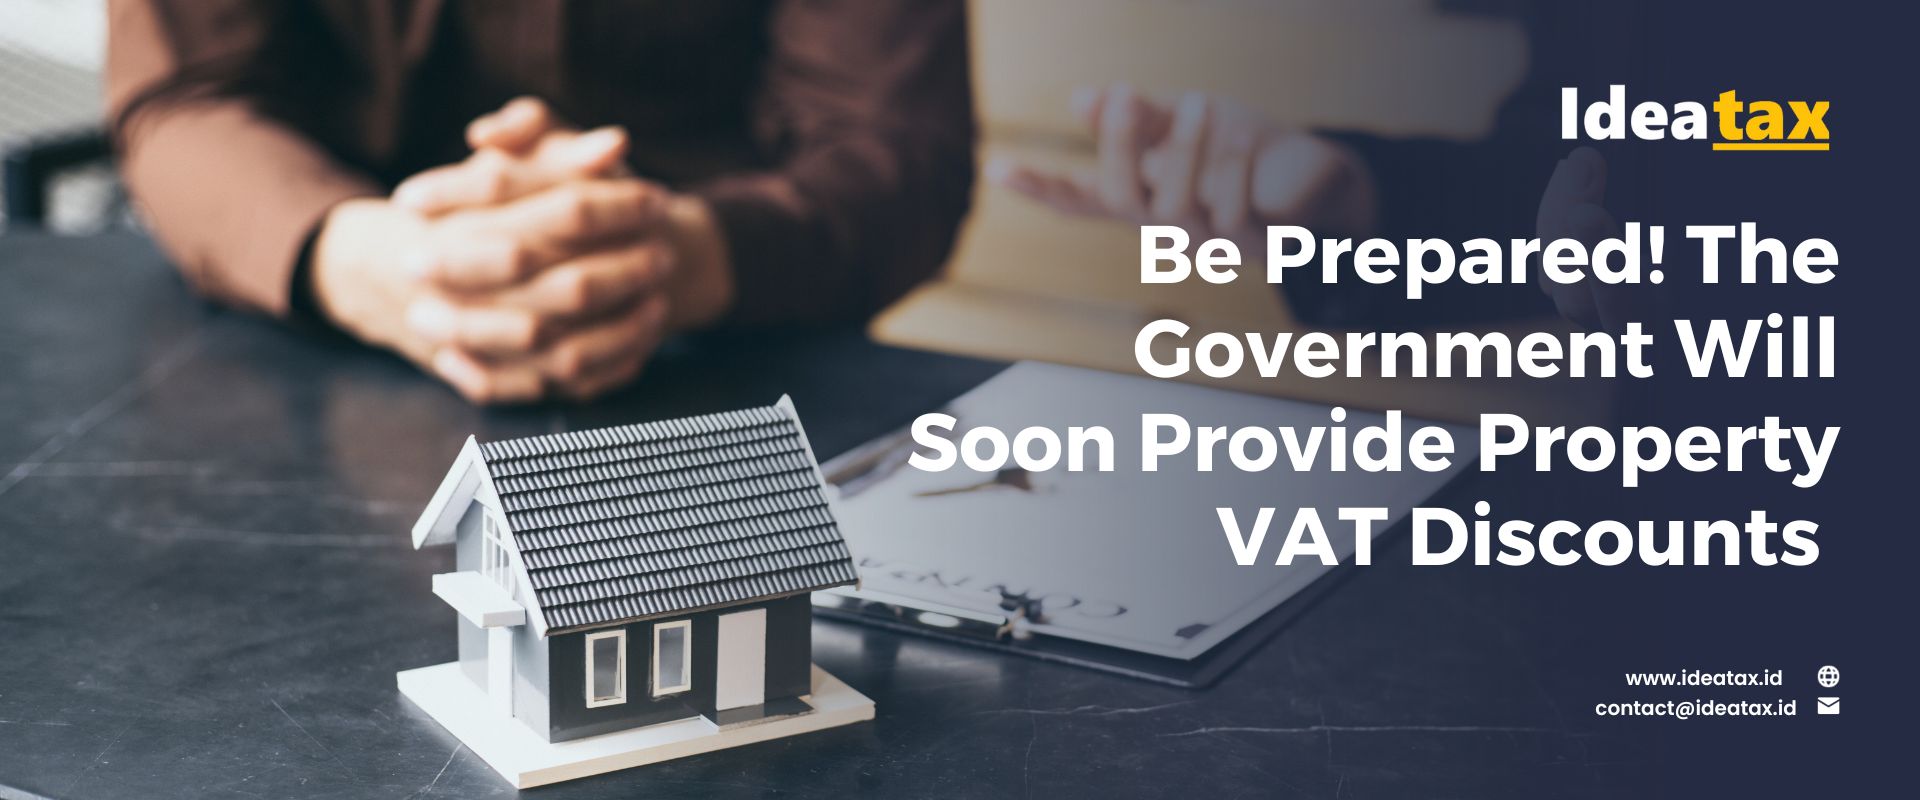 Be Prepared! The Government Will Soon Provide Property VAT Discounts